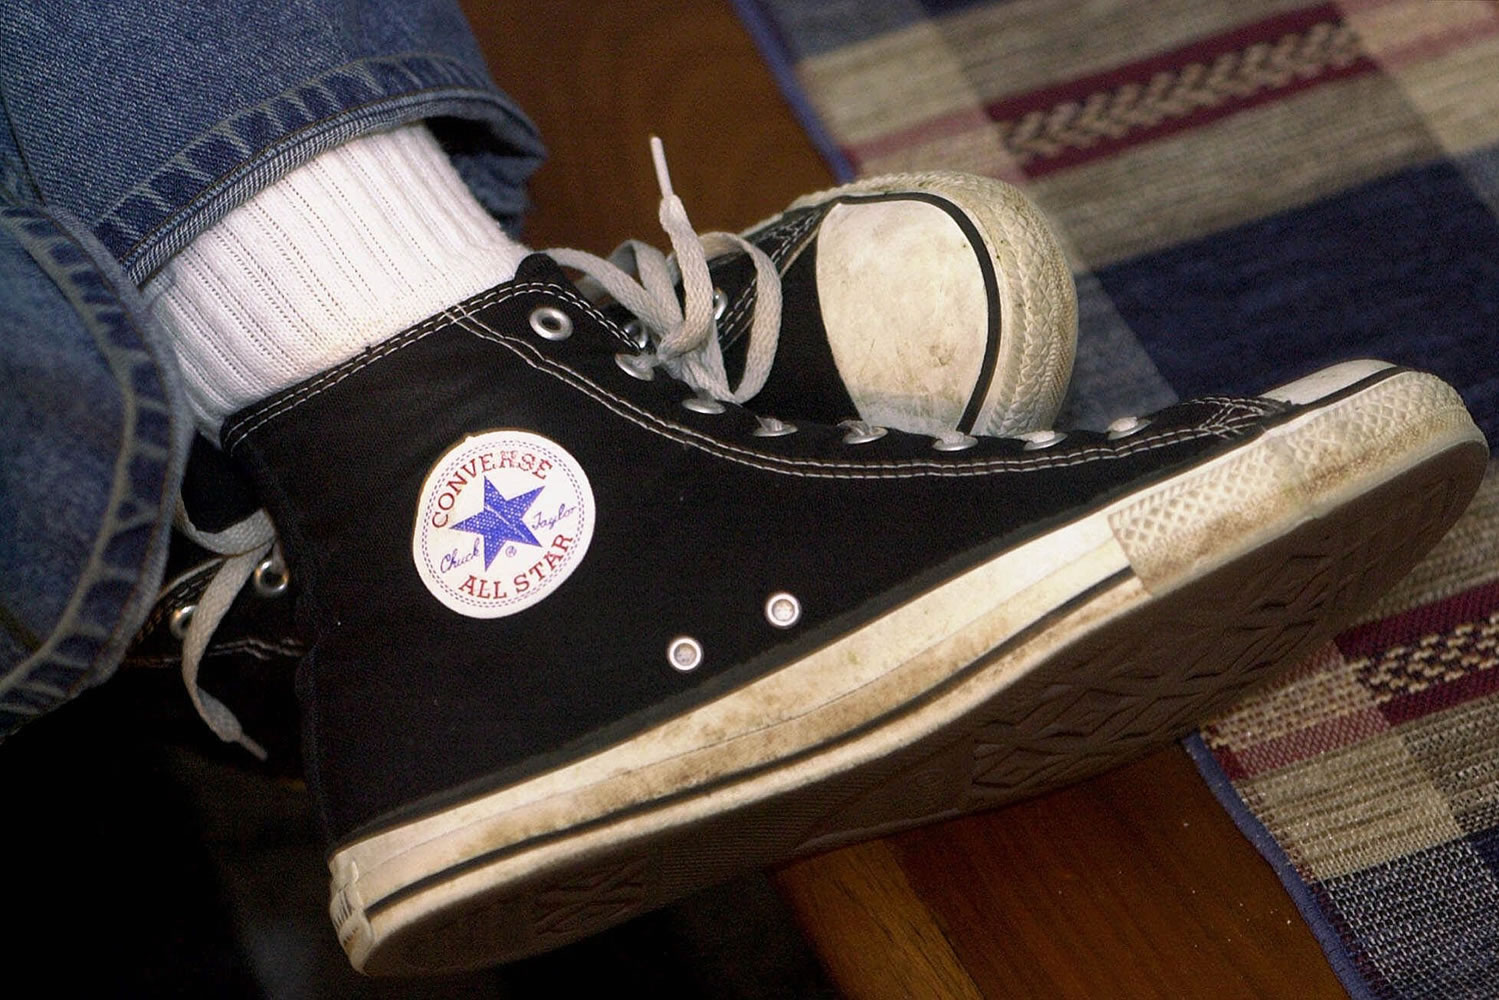 Converse, acquired by Nike Inc.